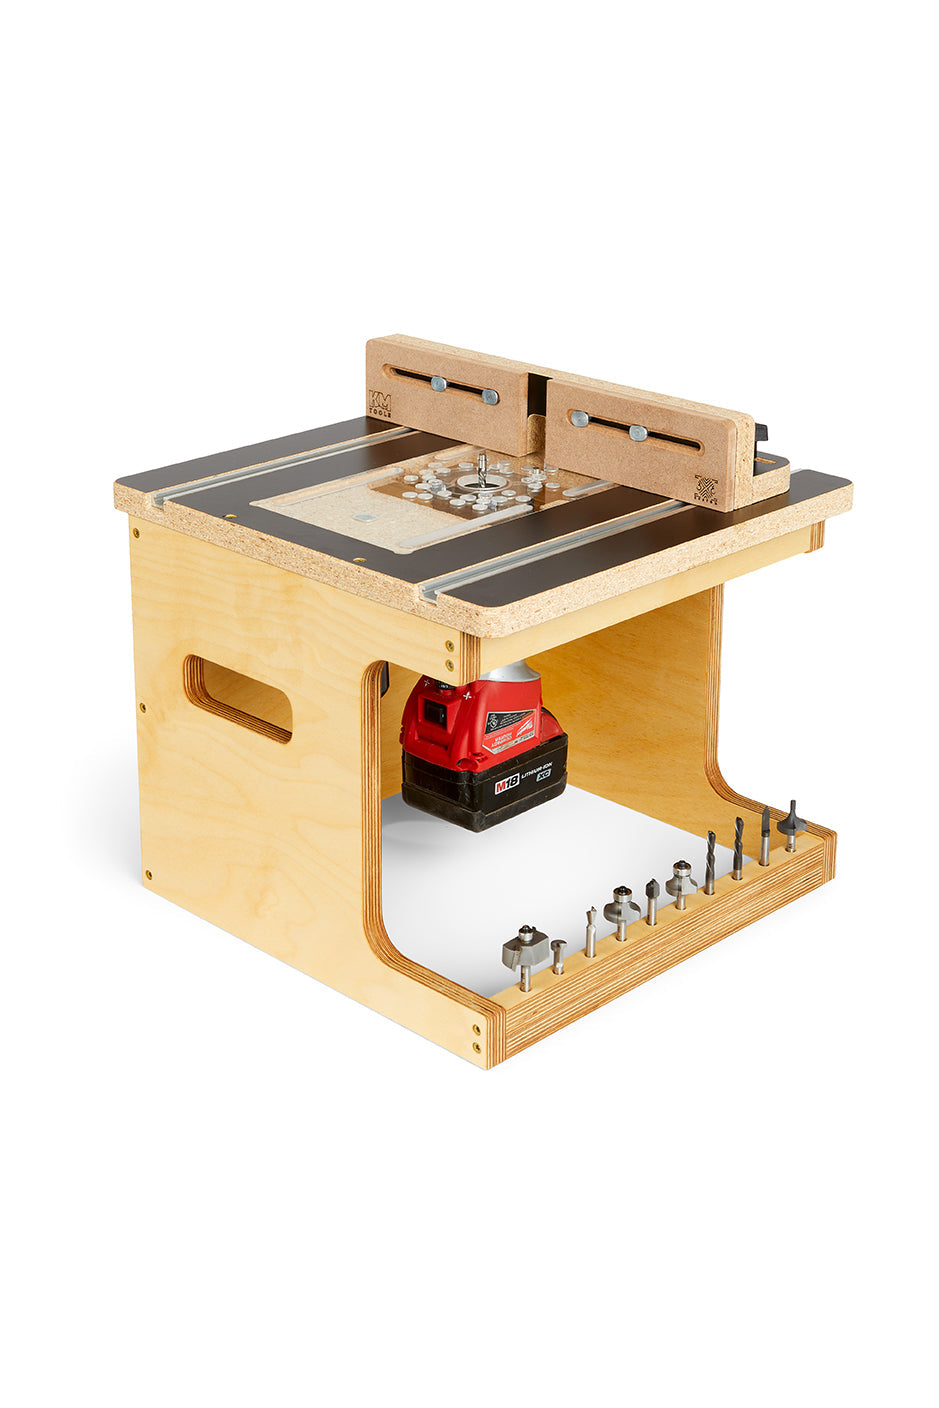 KM Tools Benchtop Router Table for 3x3 Custom Trim Router Jig